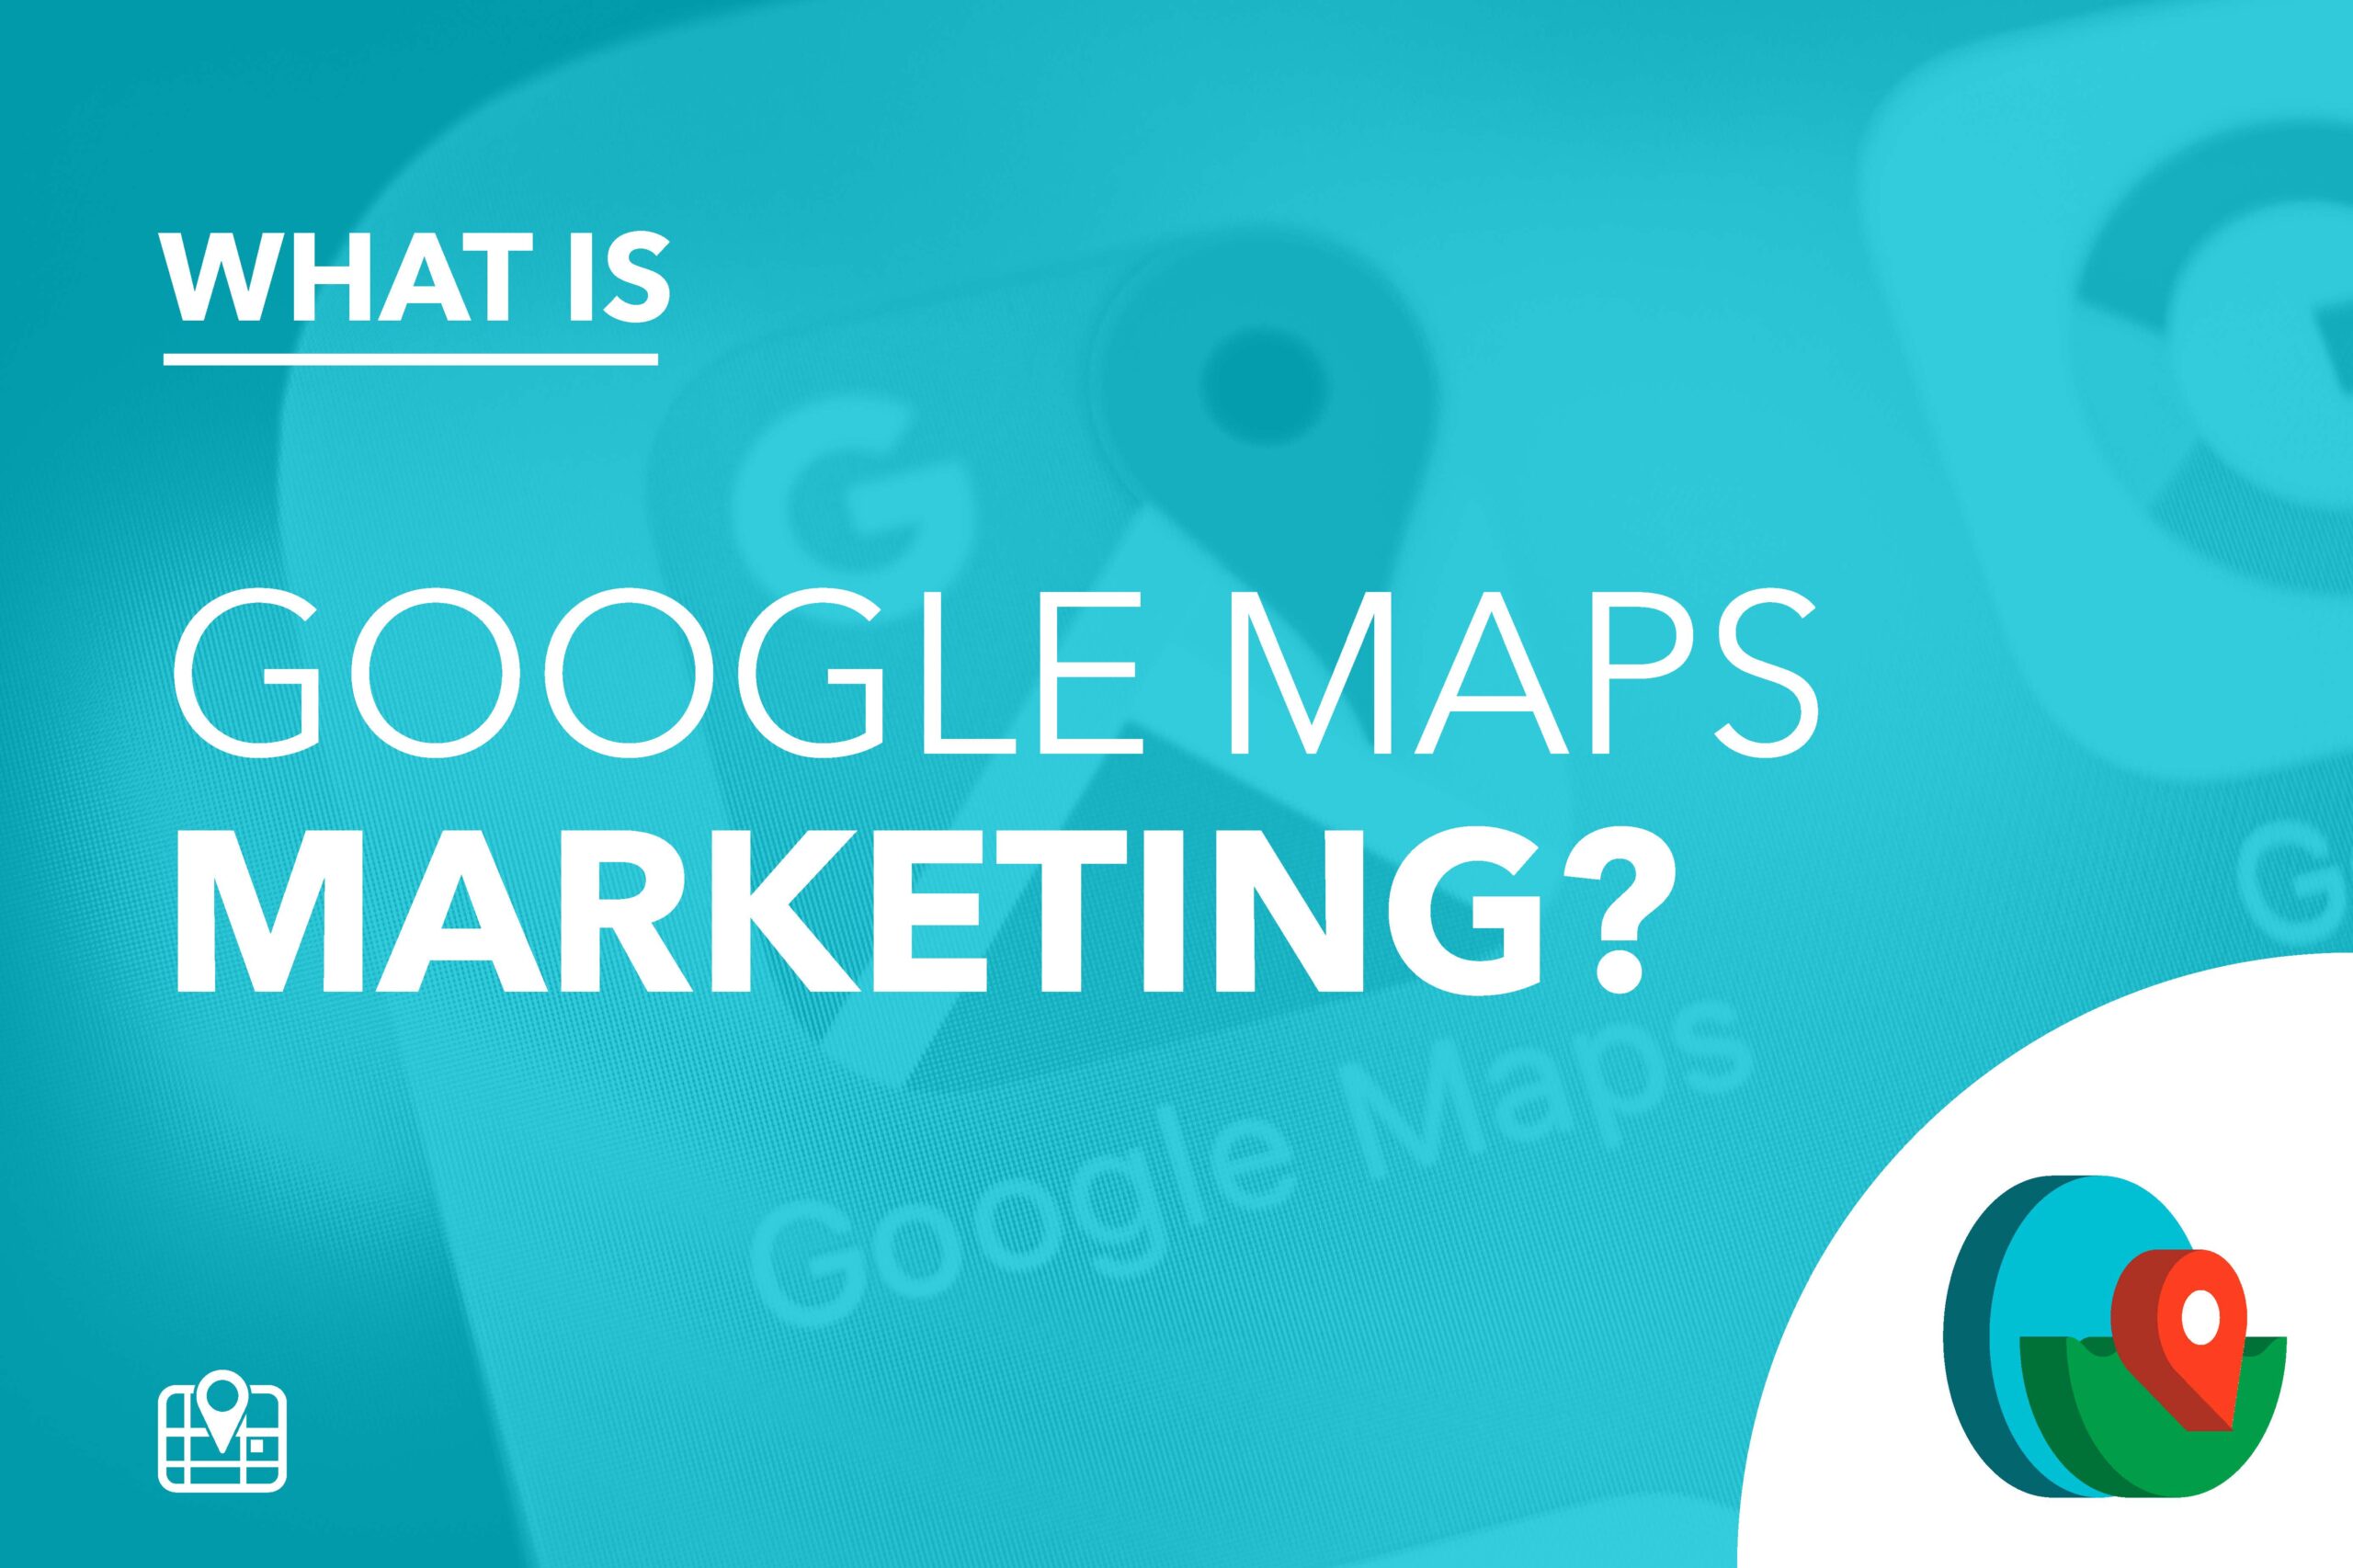 What is Google Maps Marketing?